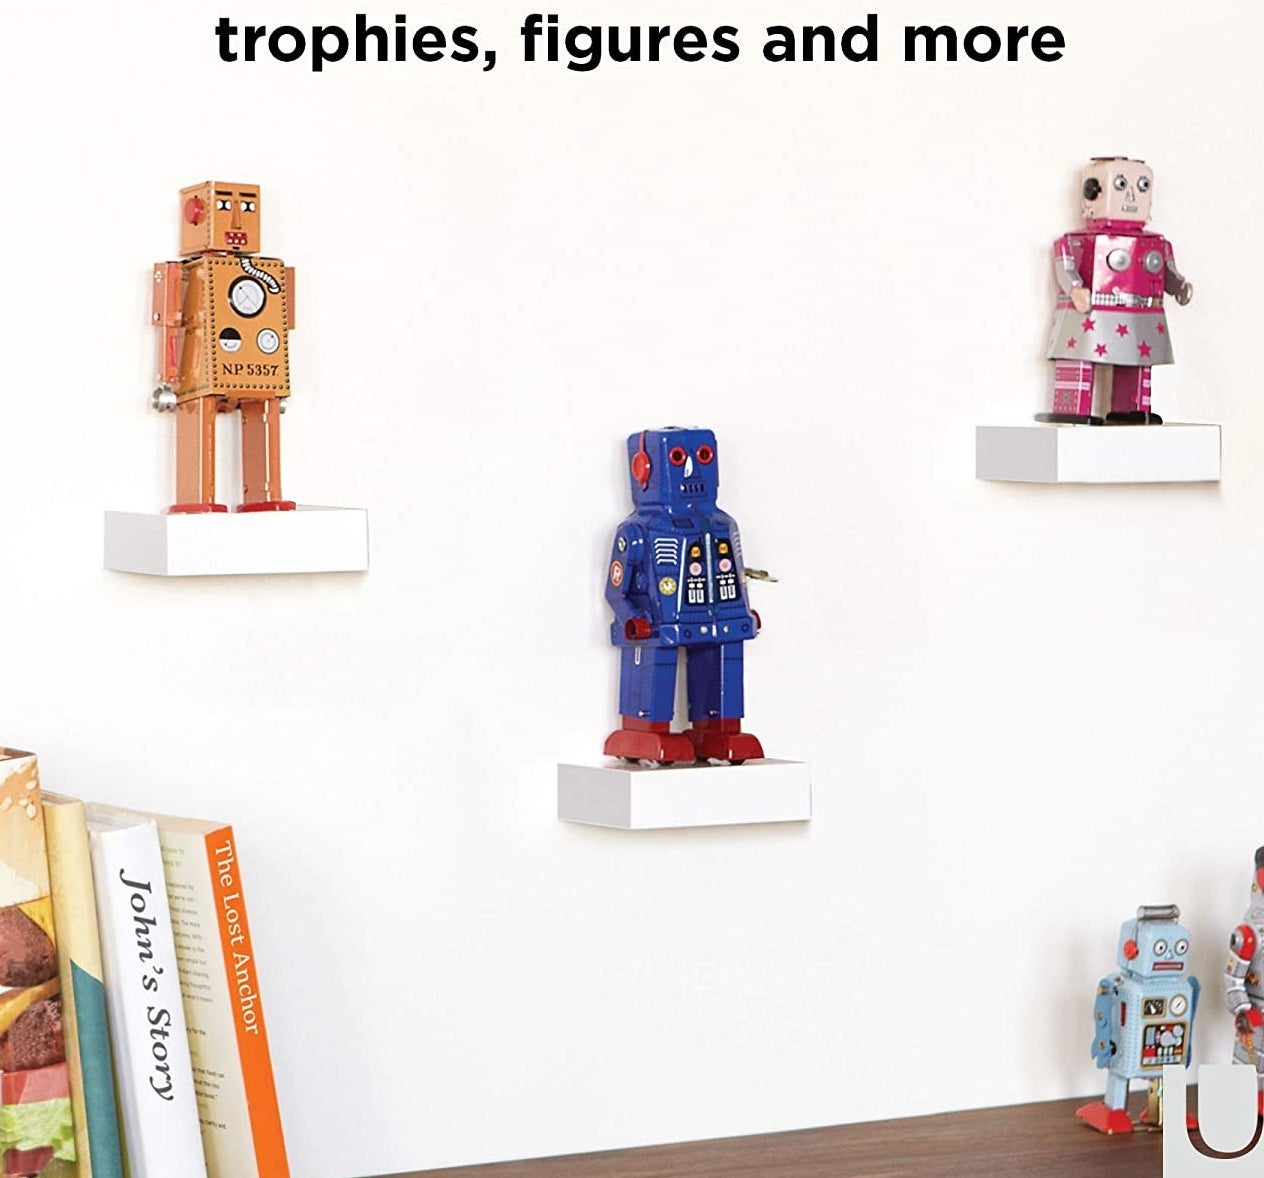 Three shelves mounted, all holding a toy robot